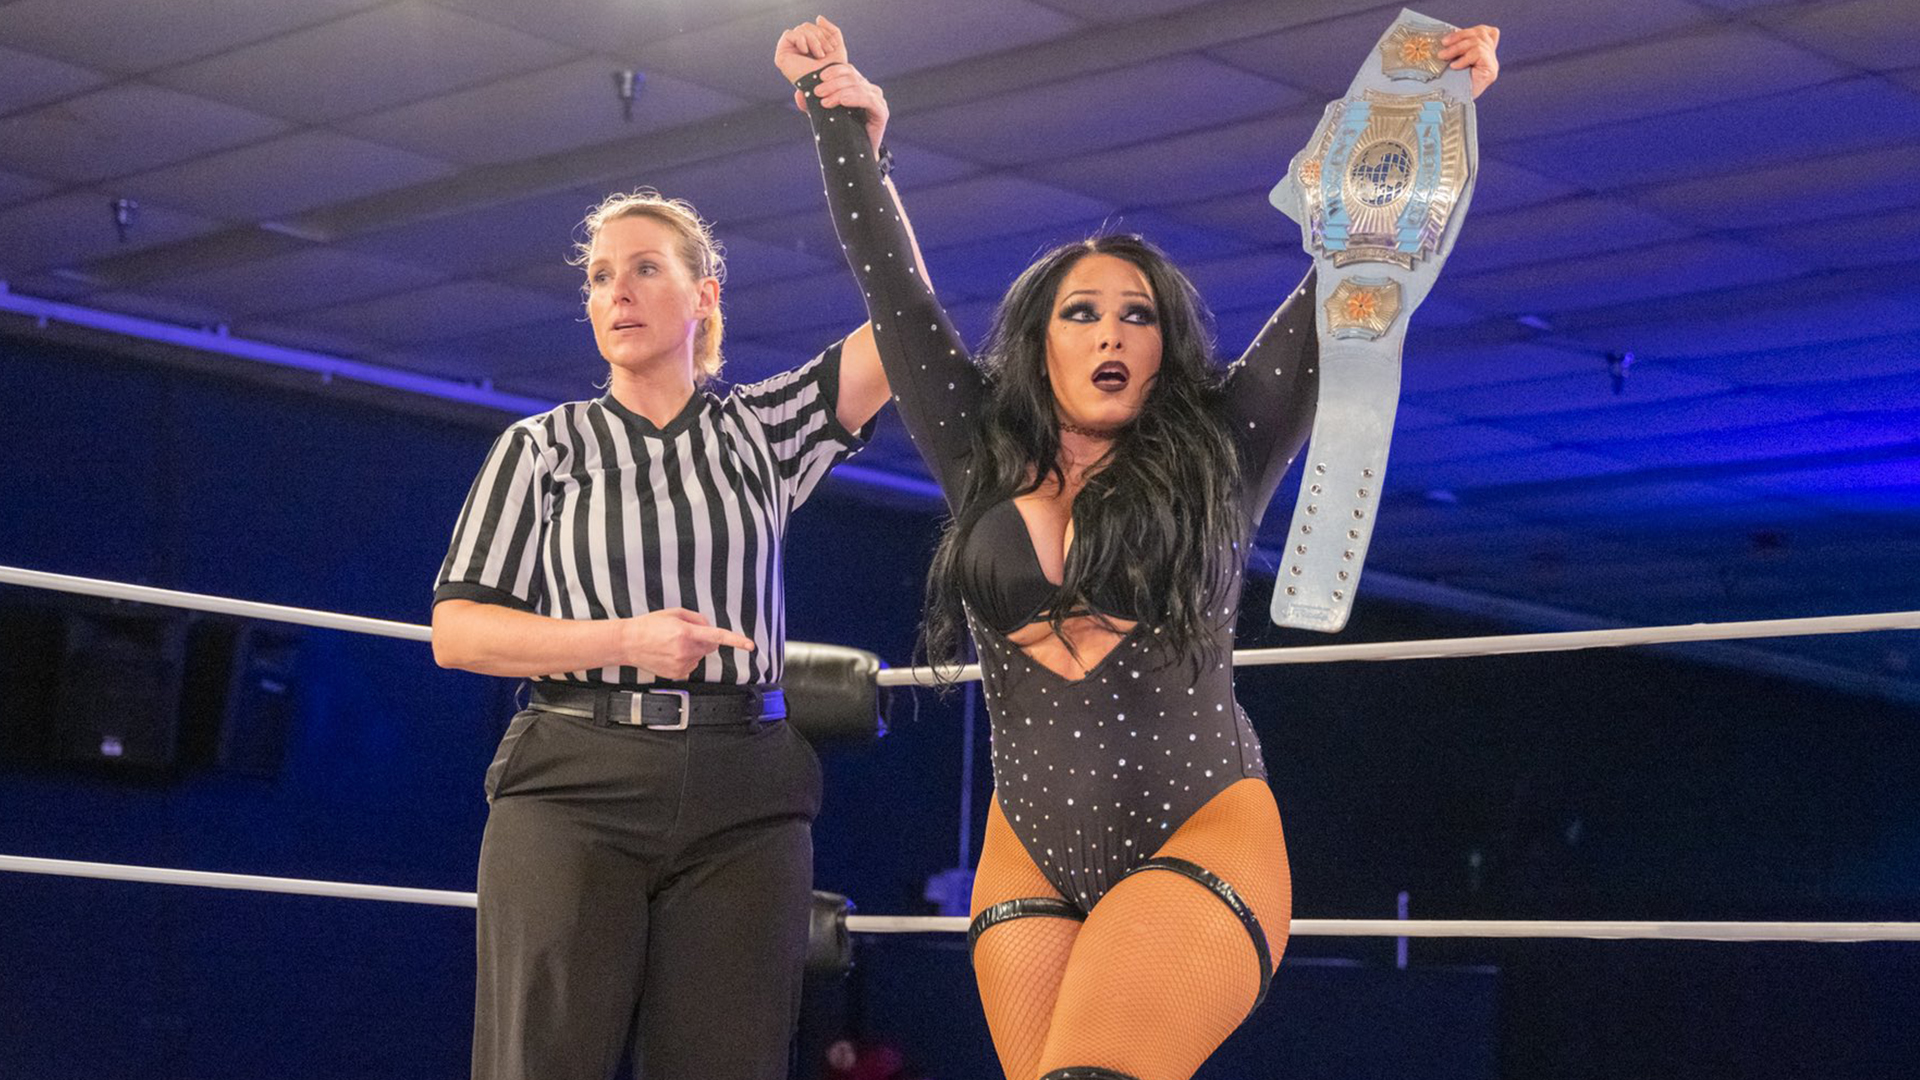 MCW Ladies Night 2022 Results